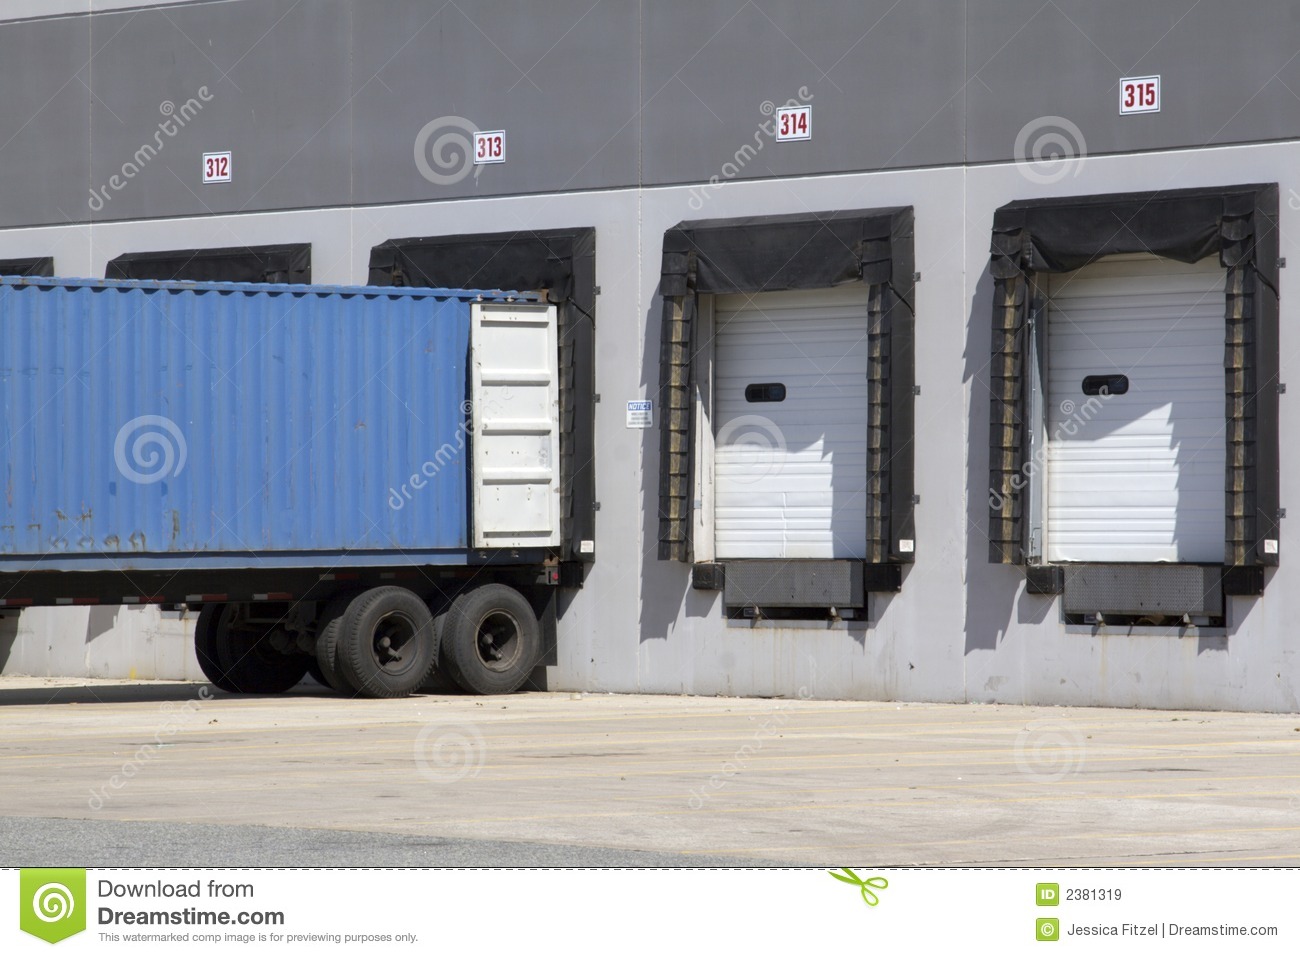 Warehouse Truck Loading Royalty Free Stock Images   Image  2381319